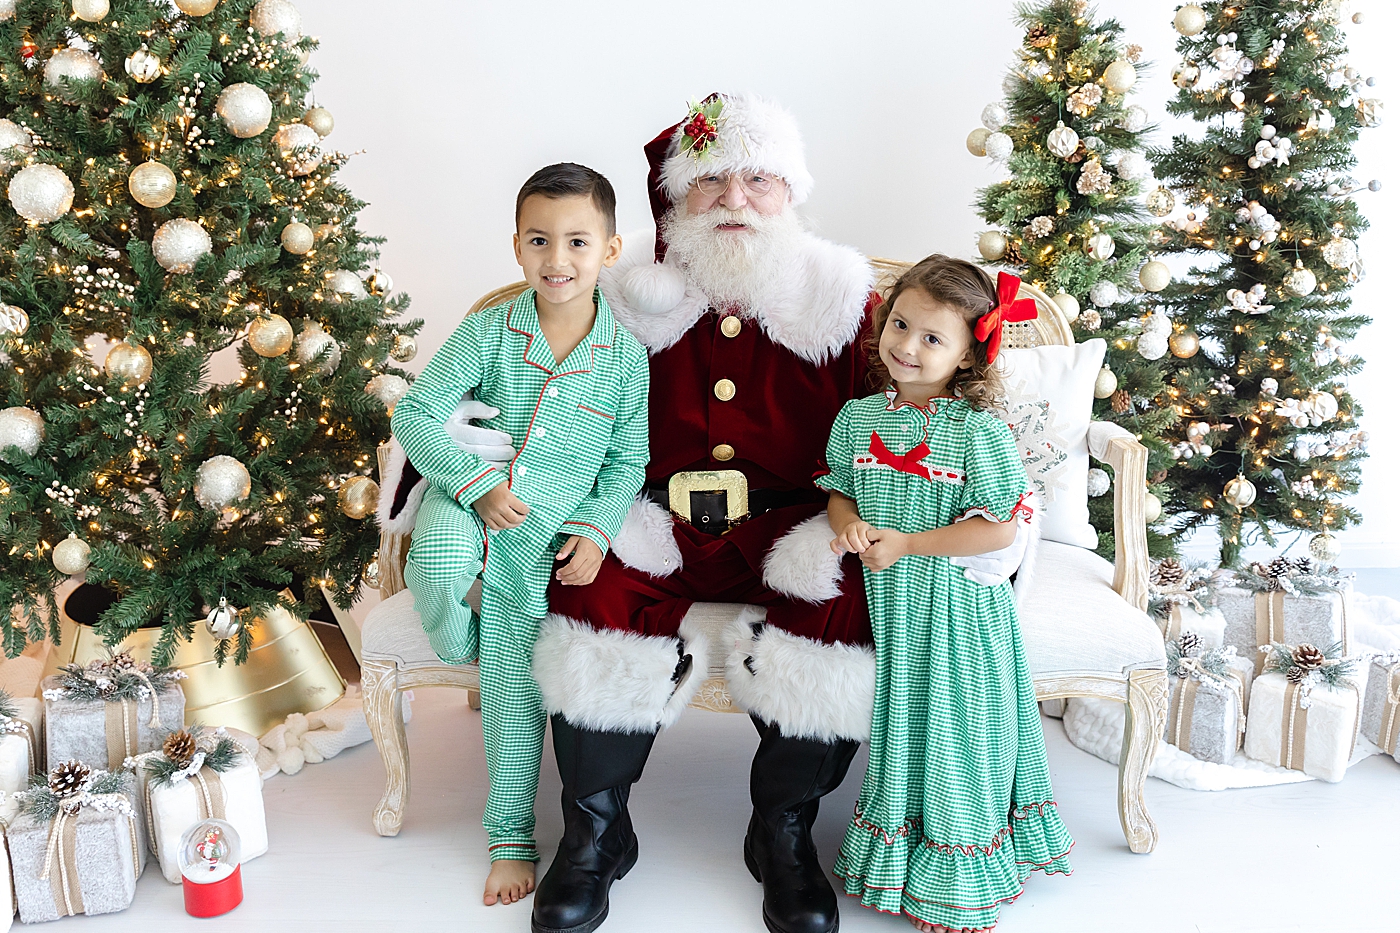 Two little kids in matching green pajamas sitting with Santa | Image by Sana Ahmed